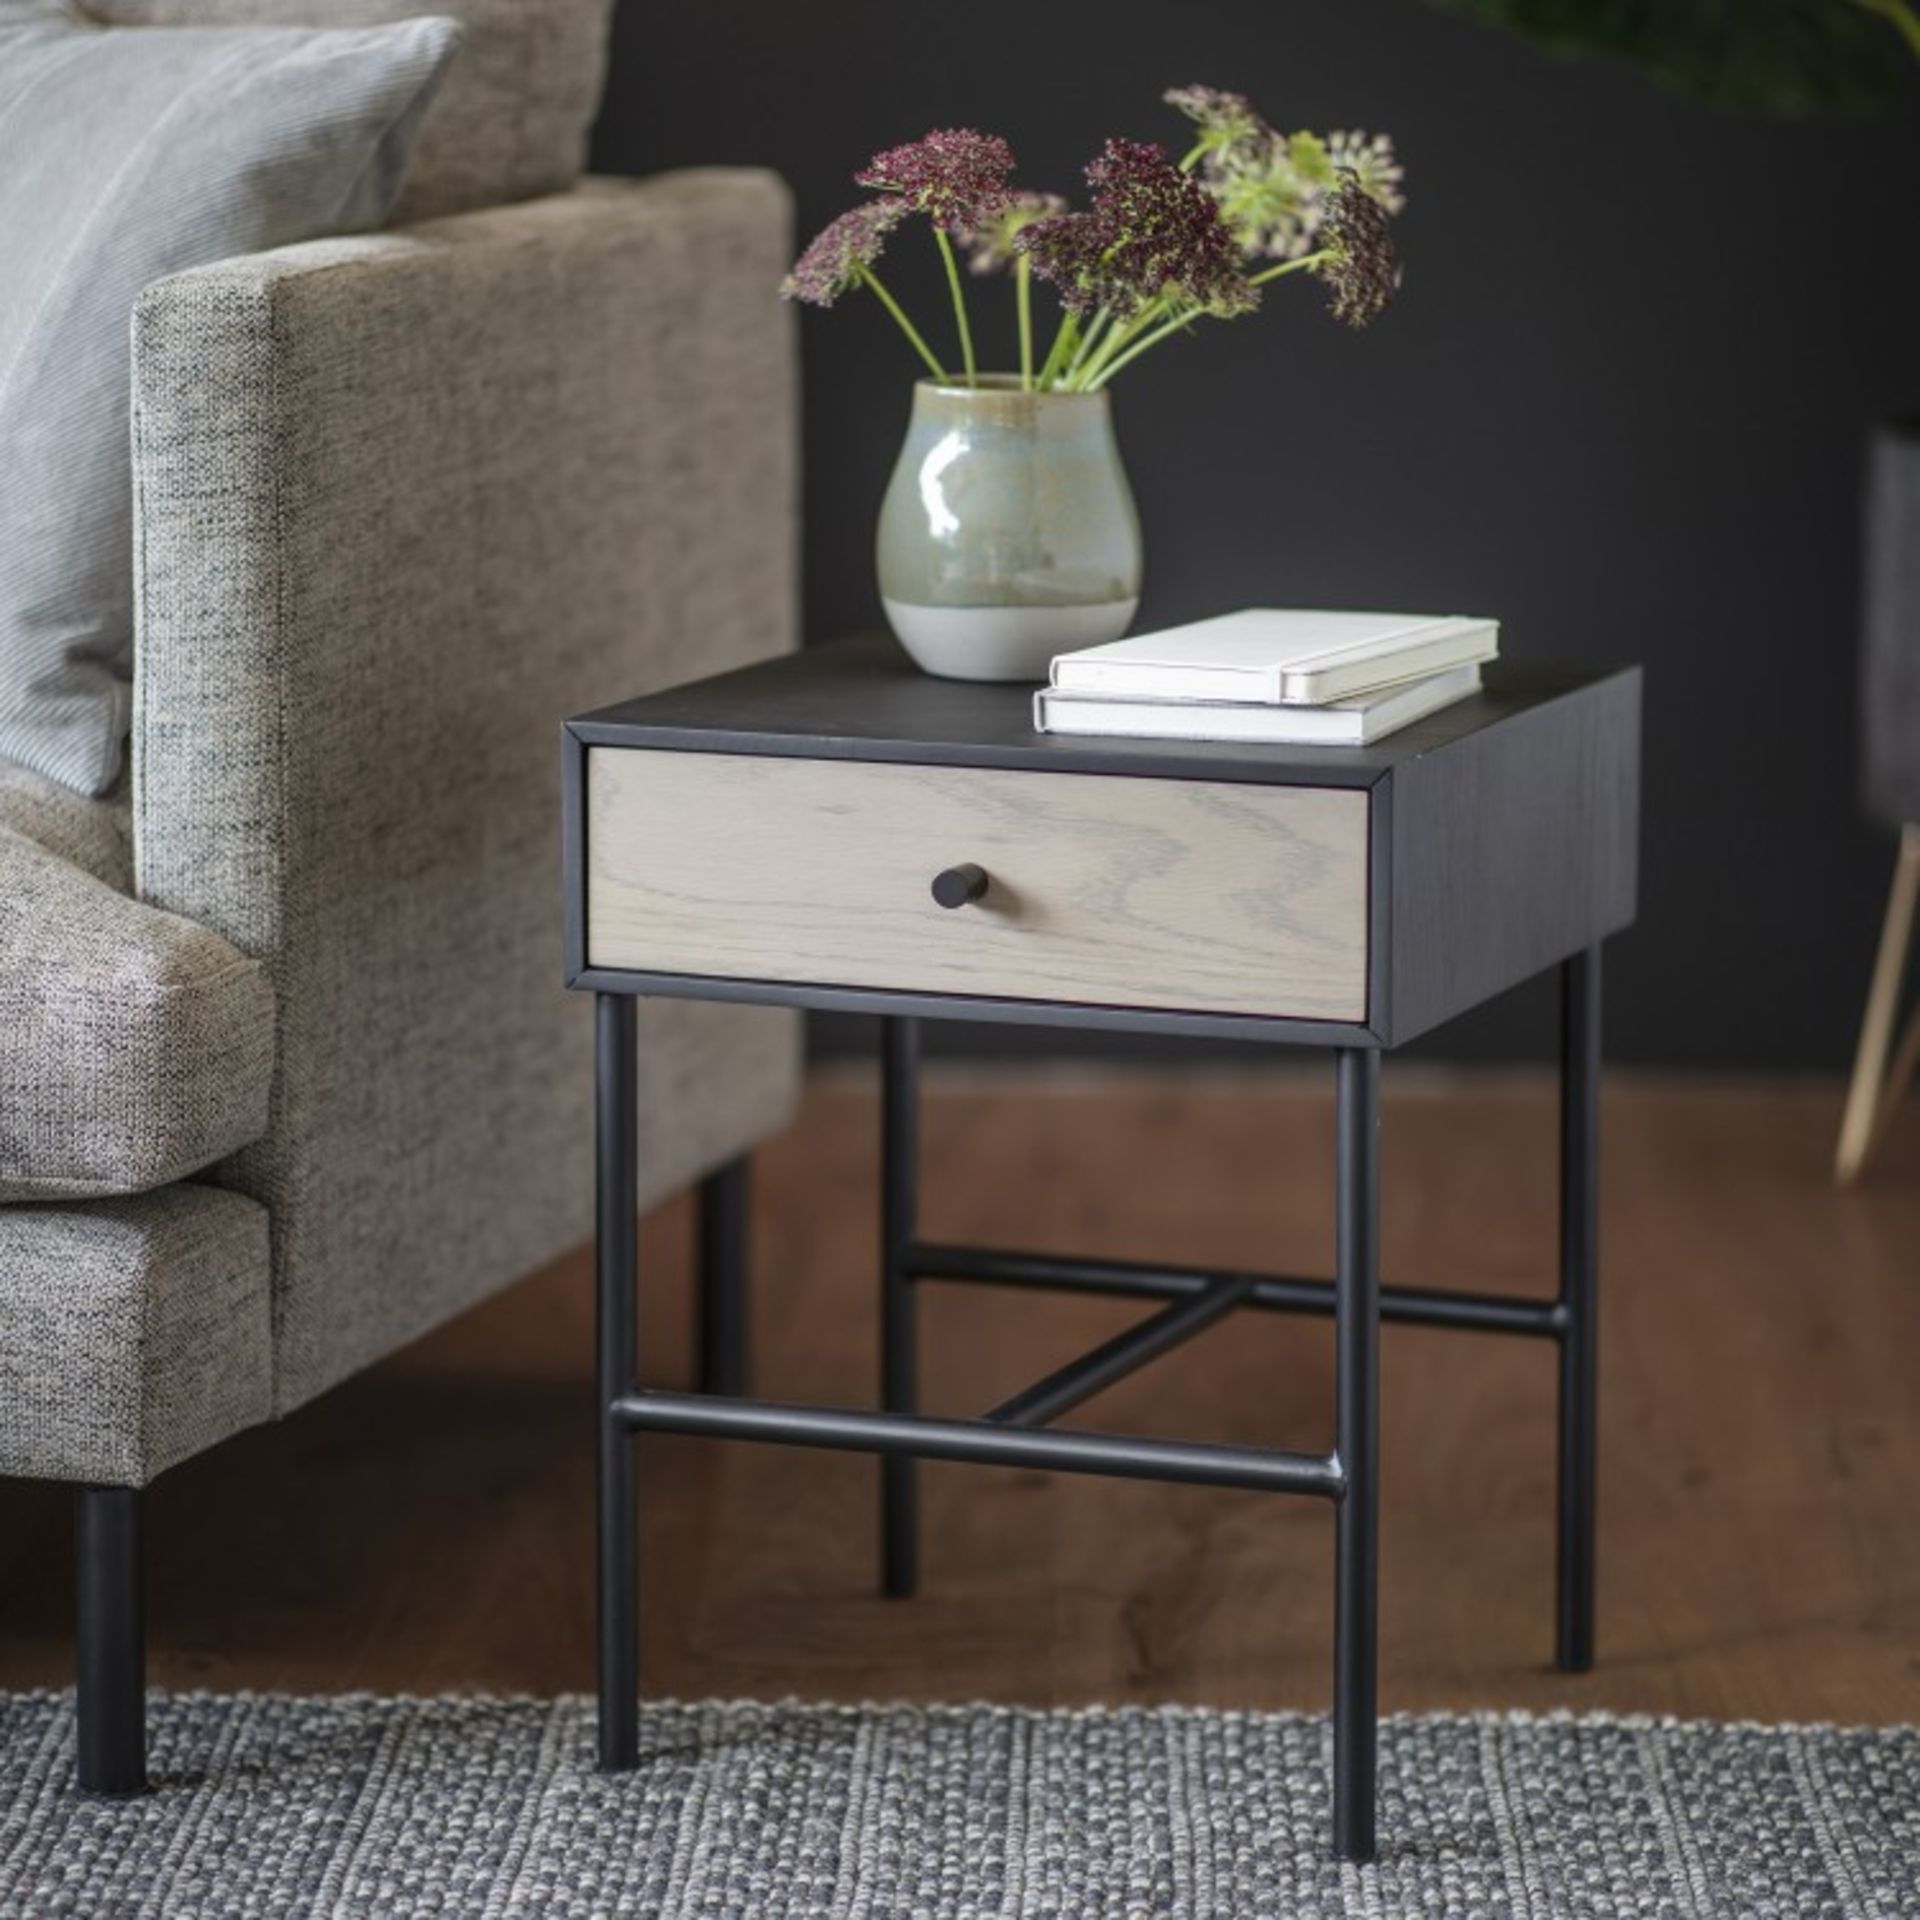 Carbury Side Table With Its Sleek Minimalist Metal Frame The Carbury Table Is A Practical Option For